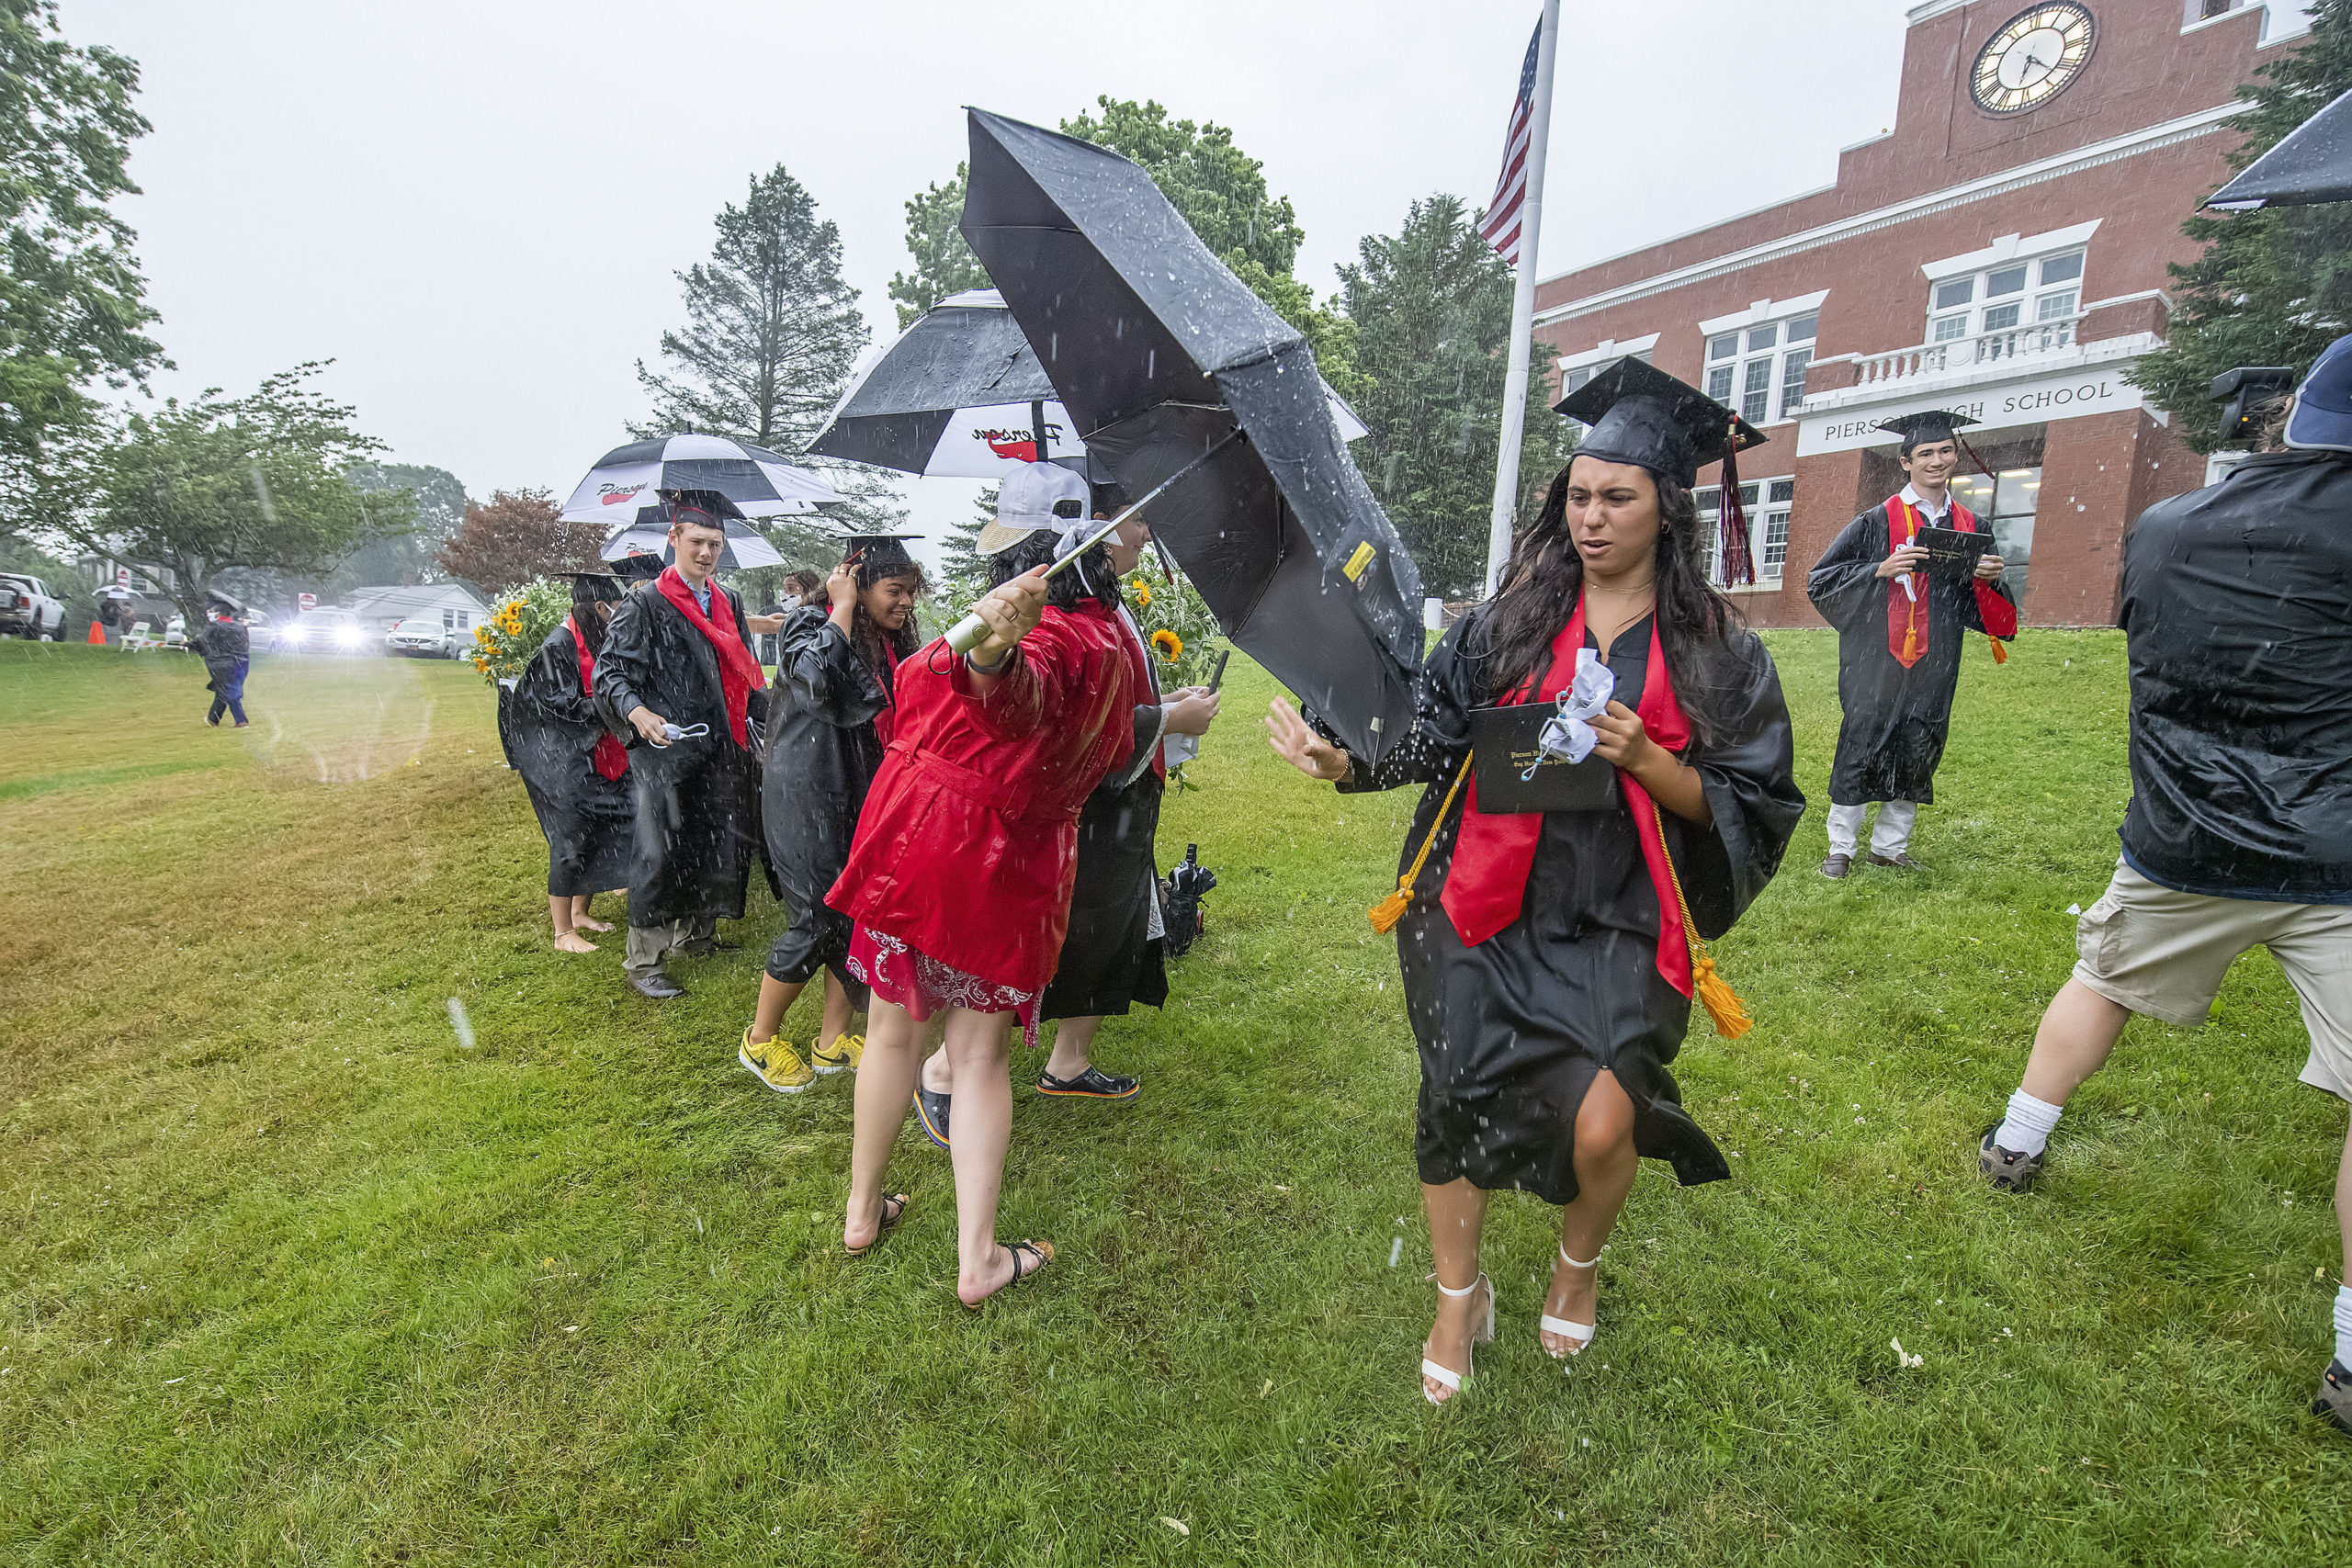 Senior Carly Gulotta rushes to get back to her seat after receiving her diploma and being photographed amidst the scramble in the pouring rain during the Pierson High School 2020 Commencement Ceremony at Pierson High School on Saturday.